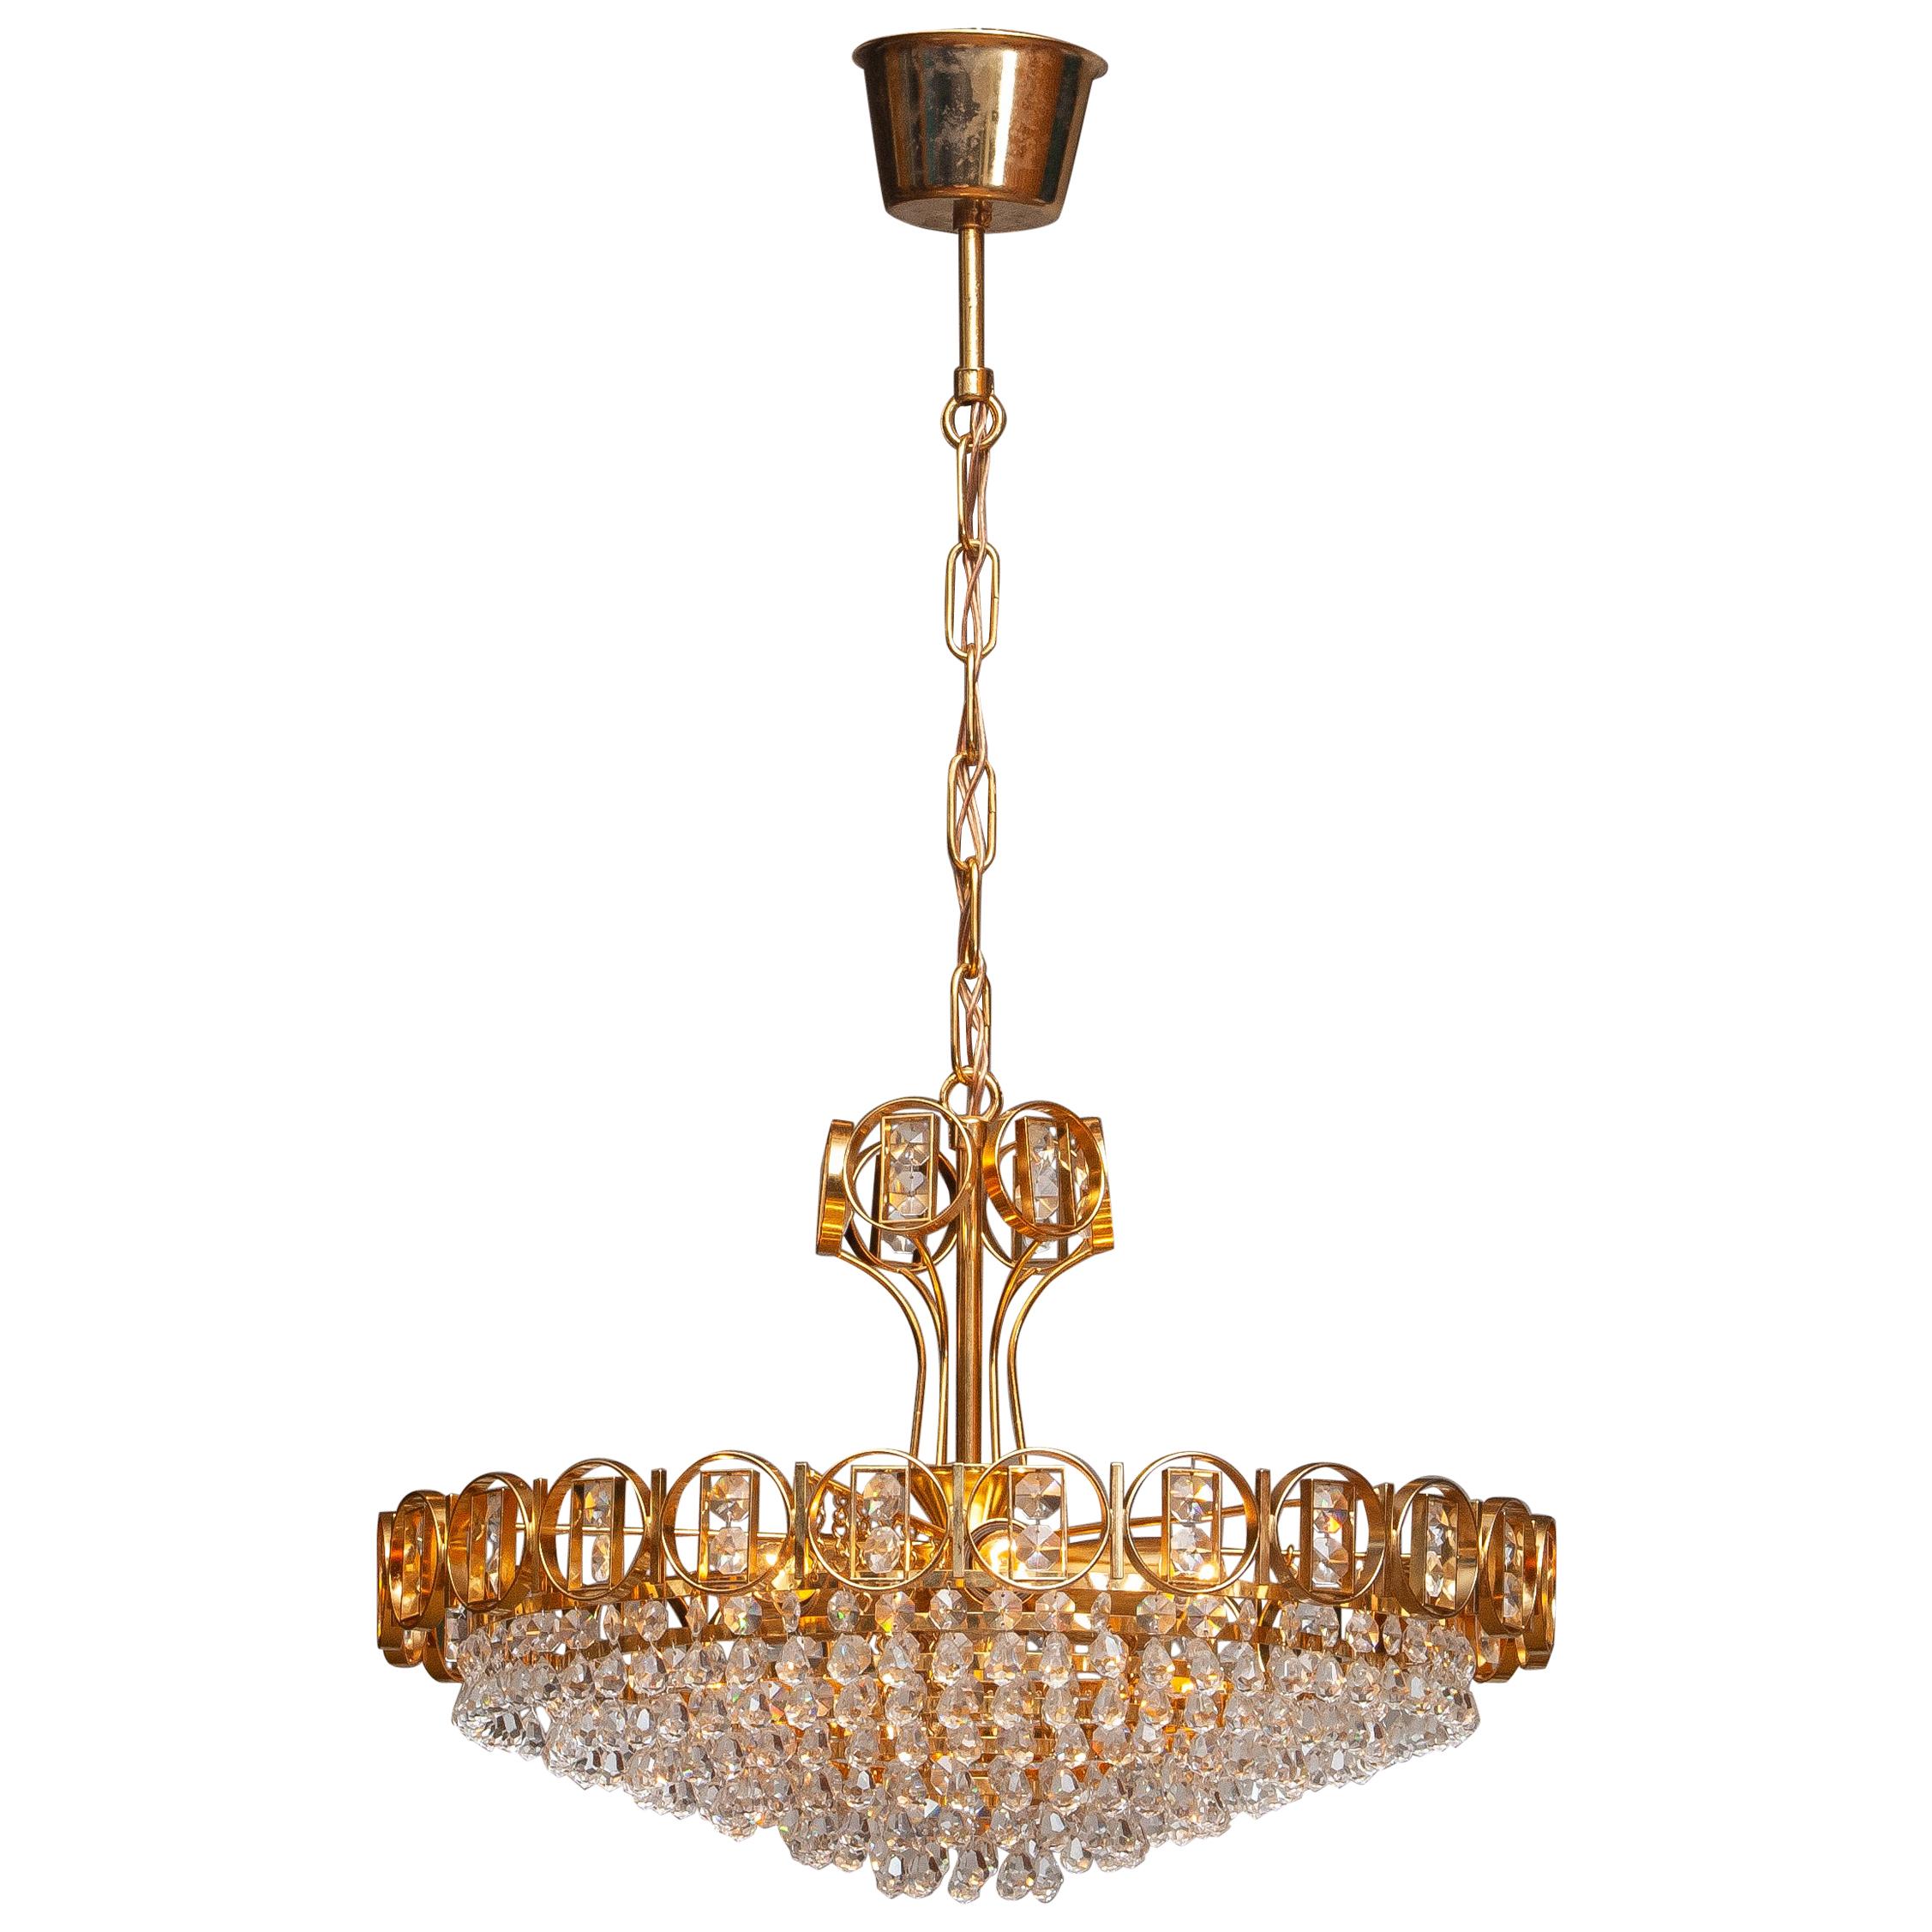 1970s, Gold Plaited Brass Chandelier with Faceted Crystals Made by Palwa Germany